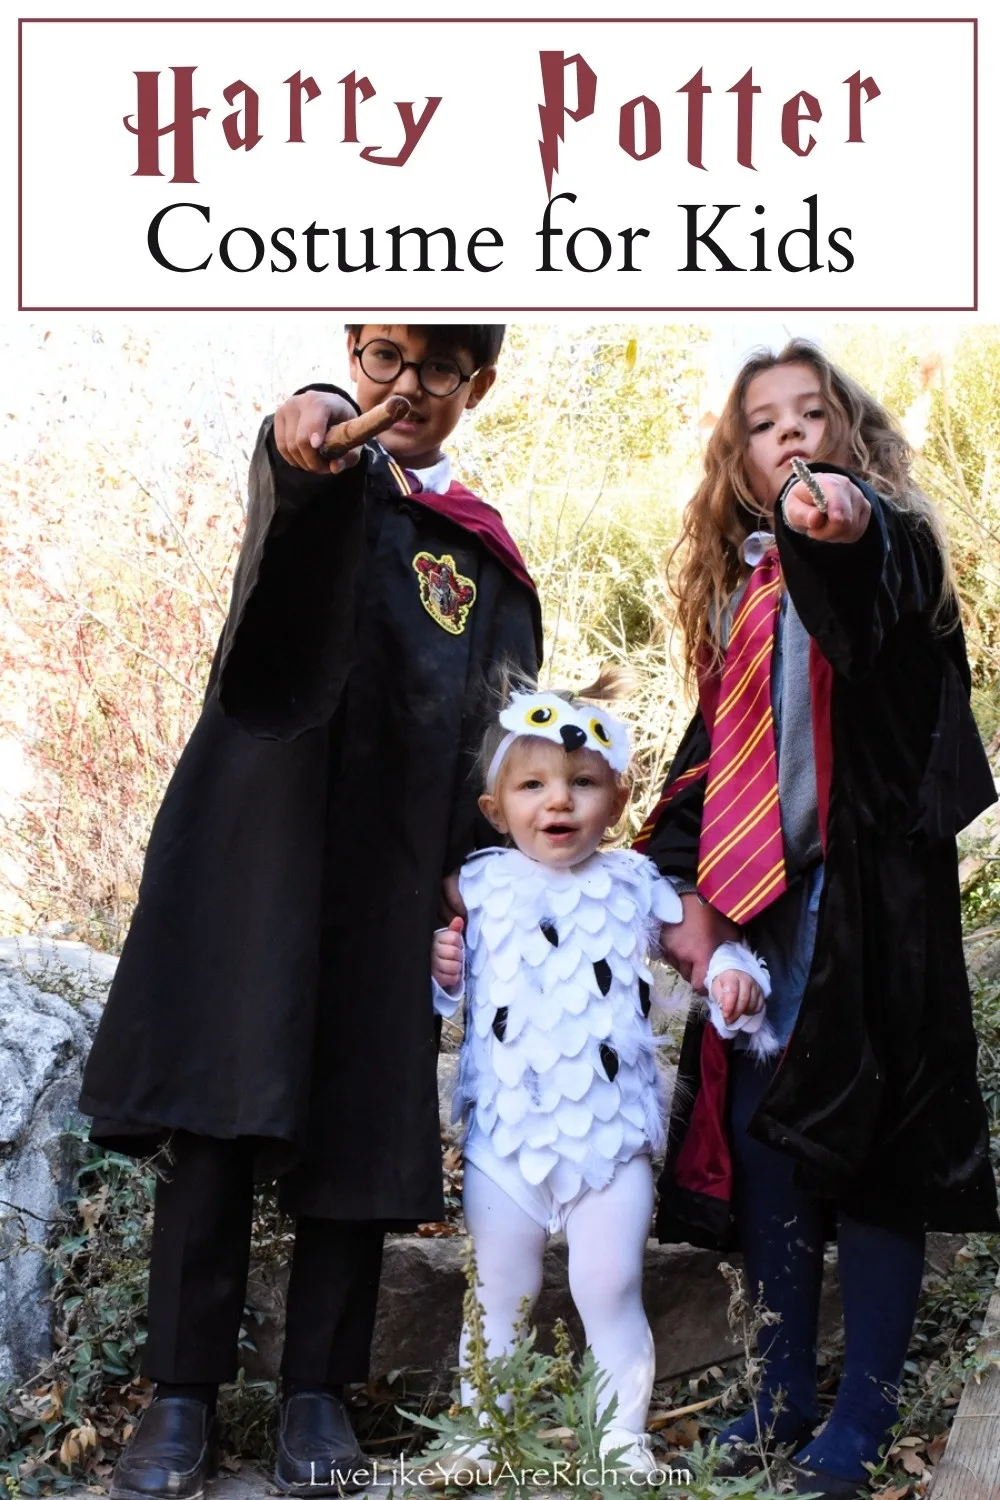 This Halloween my kids wanted to dress up in Harry Potter. At first, we were going to have Amelia (1 years old) be a Mandrake, but we eventually decided that Hedwig the Owl would be a better fit. It was a fun Halloween and the kids loved casting spells and pretending to be the characters they were dressed up as. #halloweencostume #harrypotter